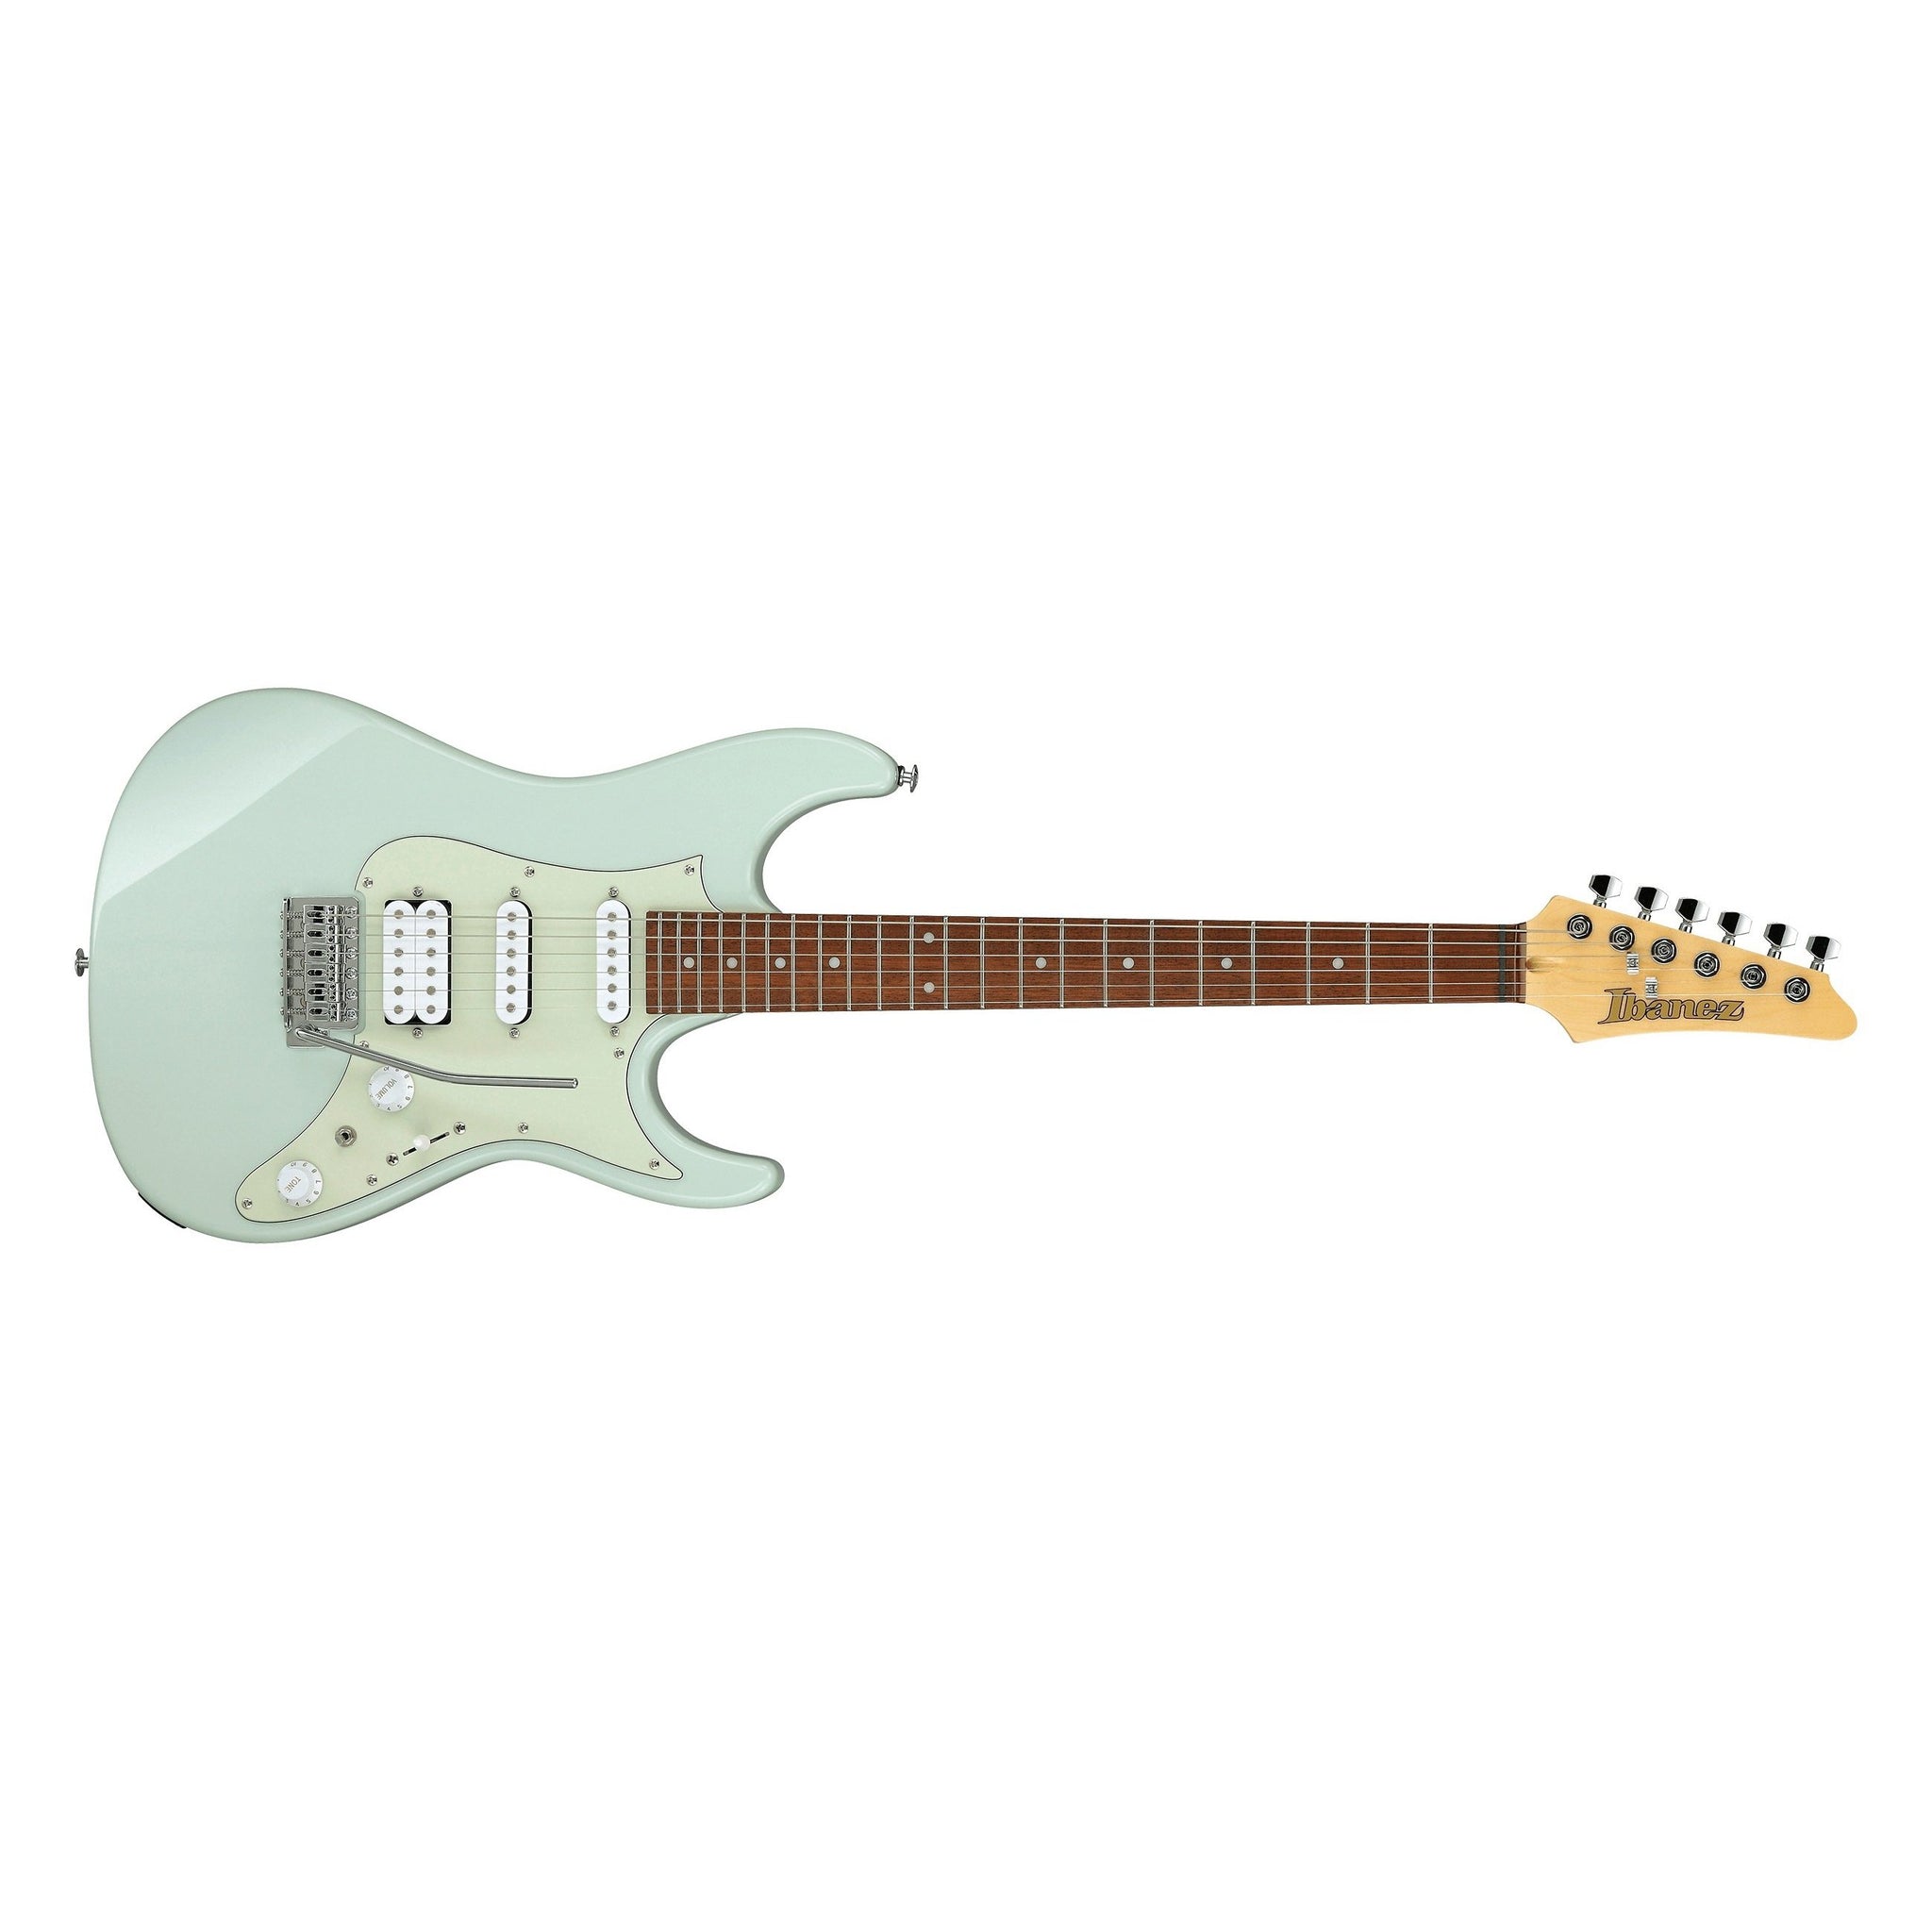 Ibanez AZES40MGR AZES Series Electric Guitar-Mint Green-Music World Academy